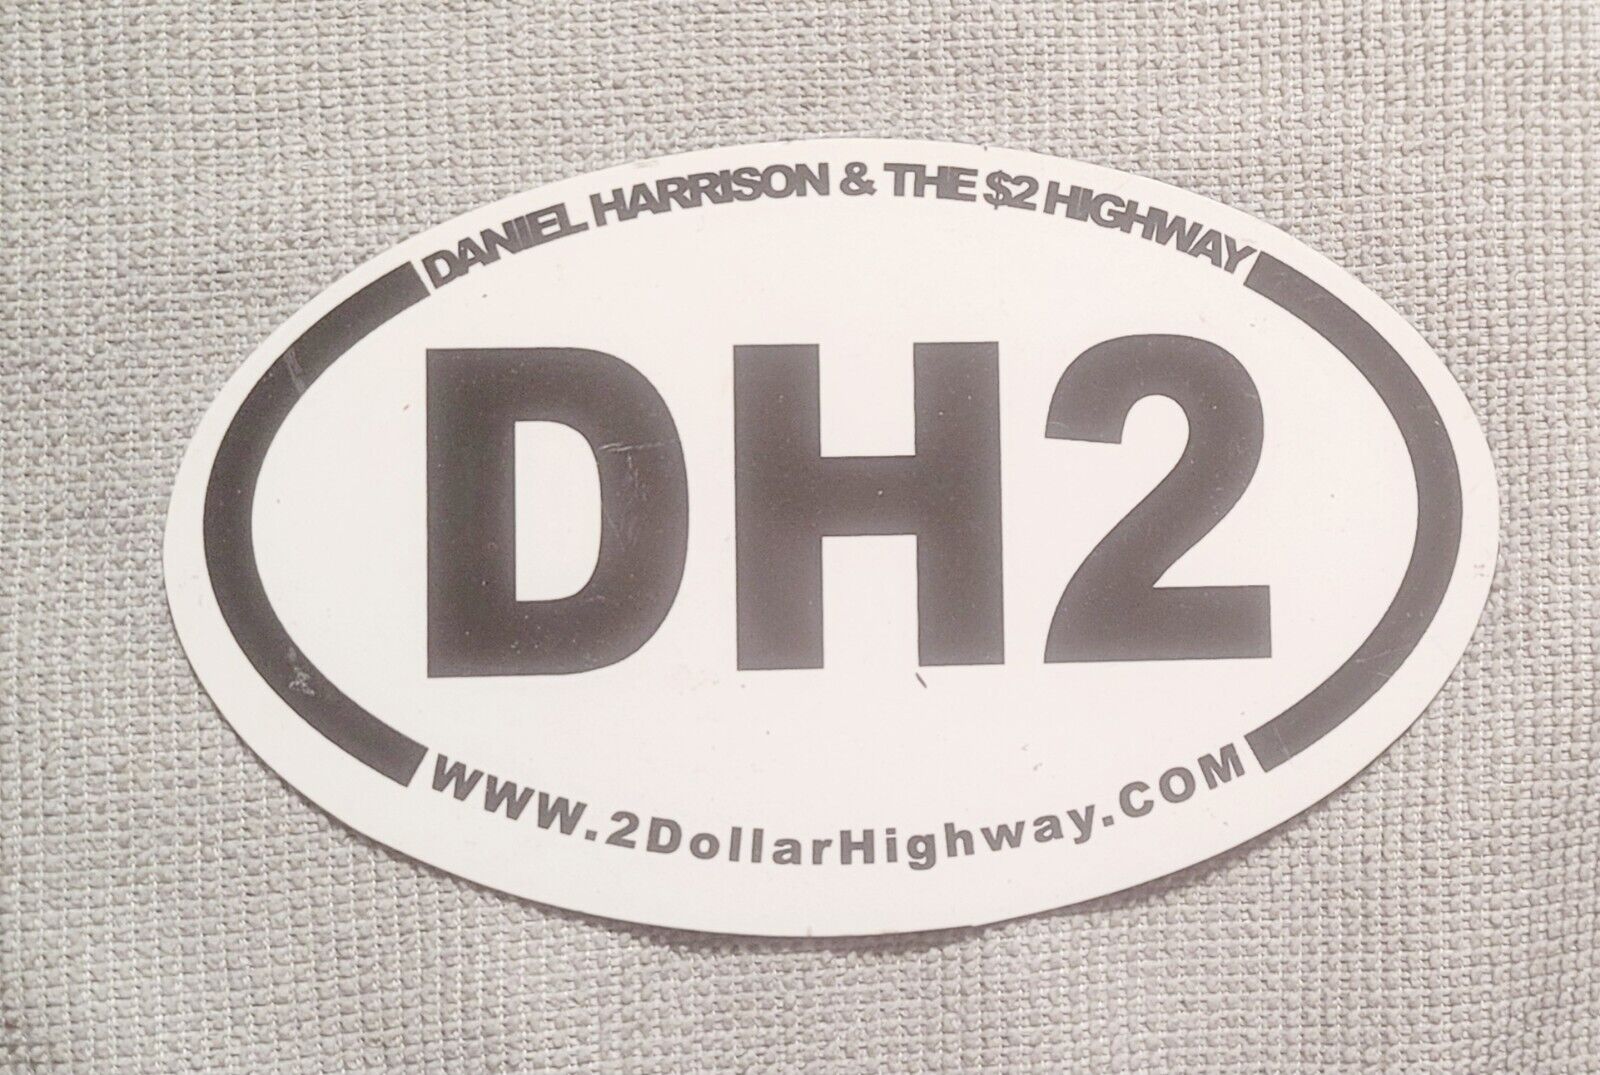 DH2 Dan Harrison & the $2 Highway Refrigerator Magnet Country Rock 